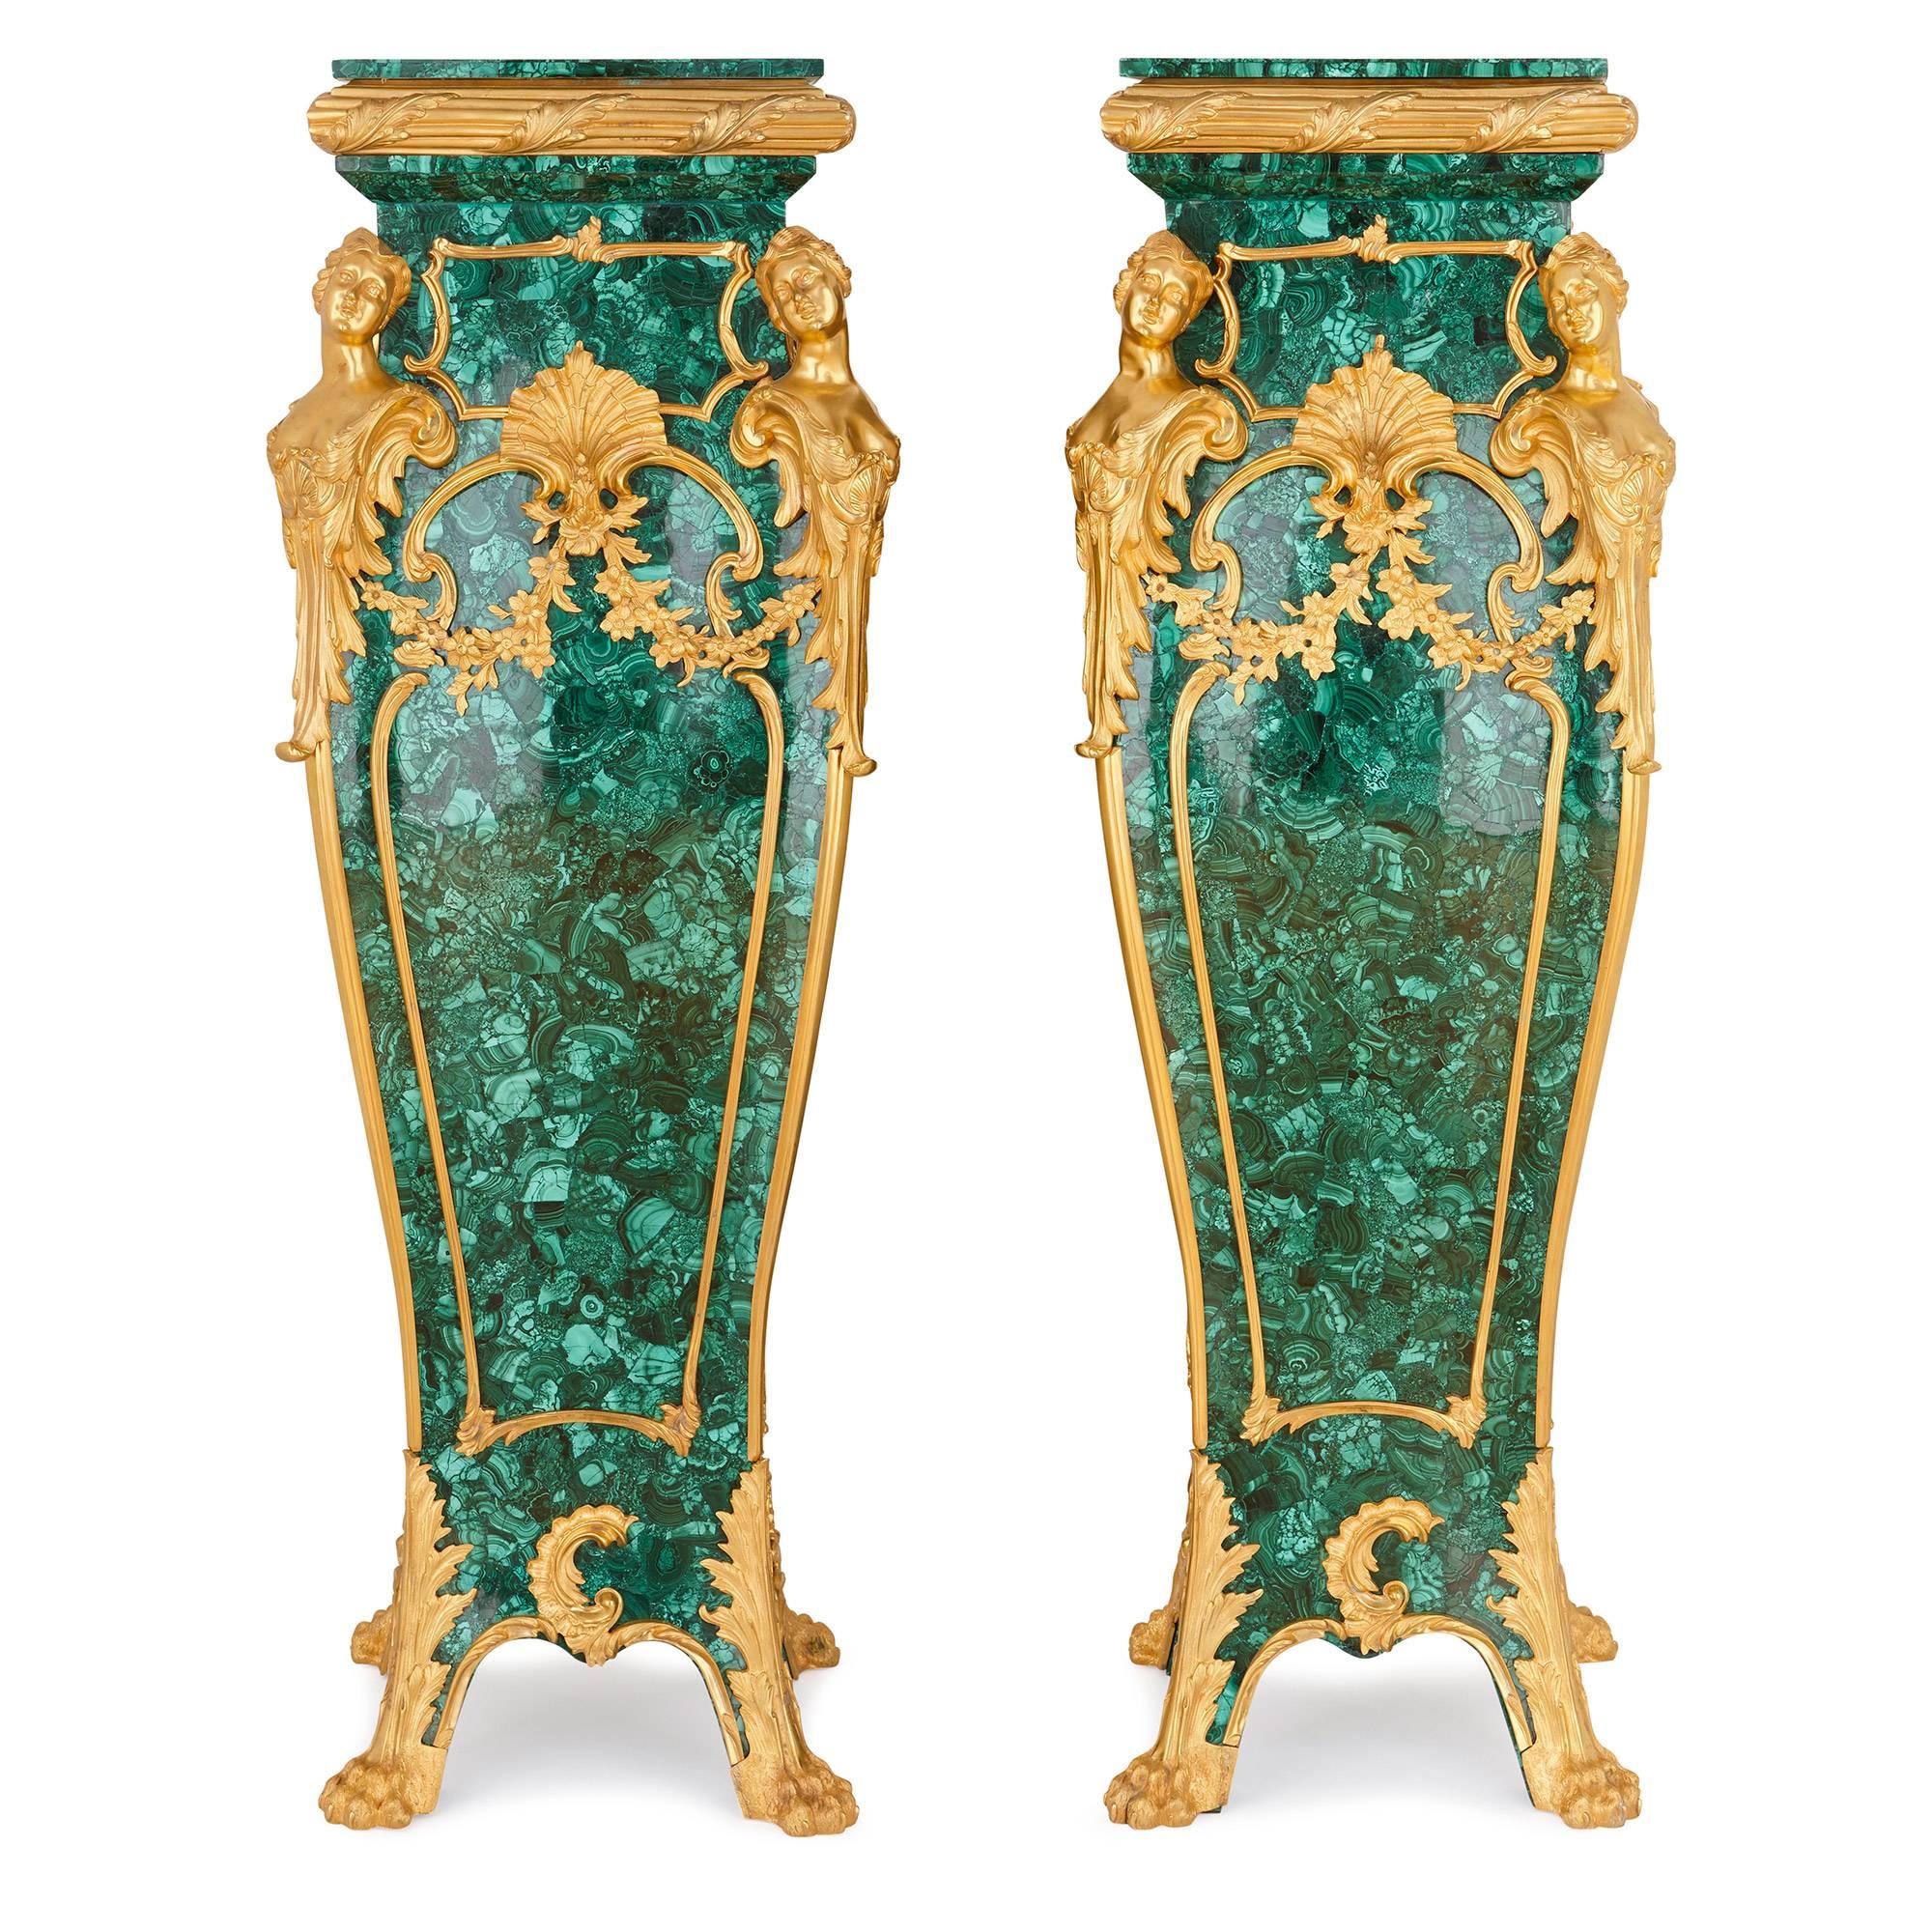 This brilliant pair of pedestals, finished in cool green malachite and with beautiful ormolu mounts, are statement pieces in the truest sense. Made for bold, glamorous interiors, they wonderfully combine modern design sensibilities with the graceful